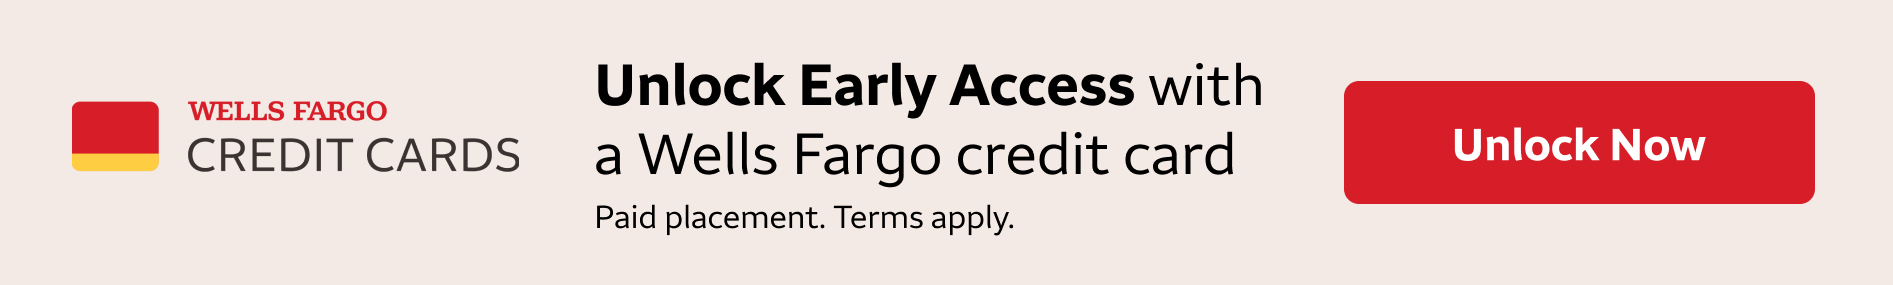 Unlock Early Access to these deals with a Wells Fargo credit card. To unlock these deals, please click this banner. When you click the banner, a dialogue box will appear for you to enter your Wells Fargo credit card. After entering your credit card, you w